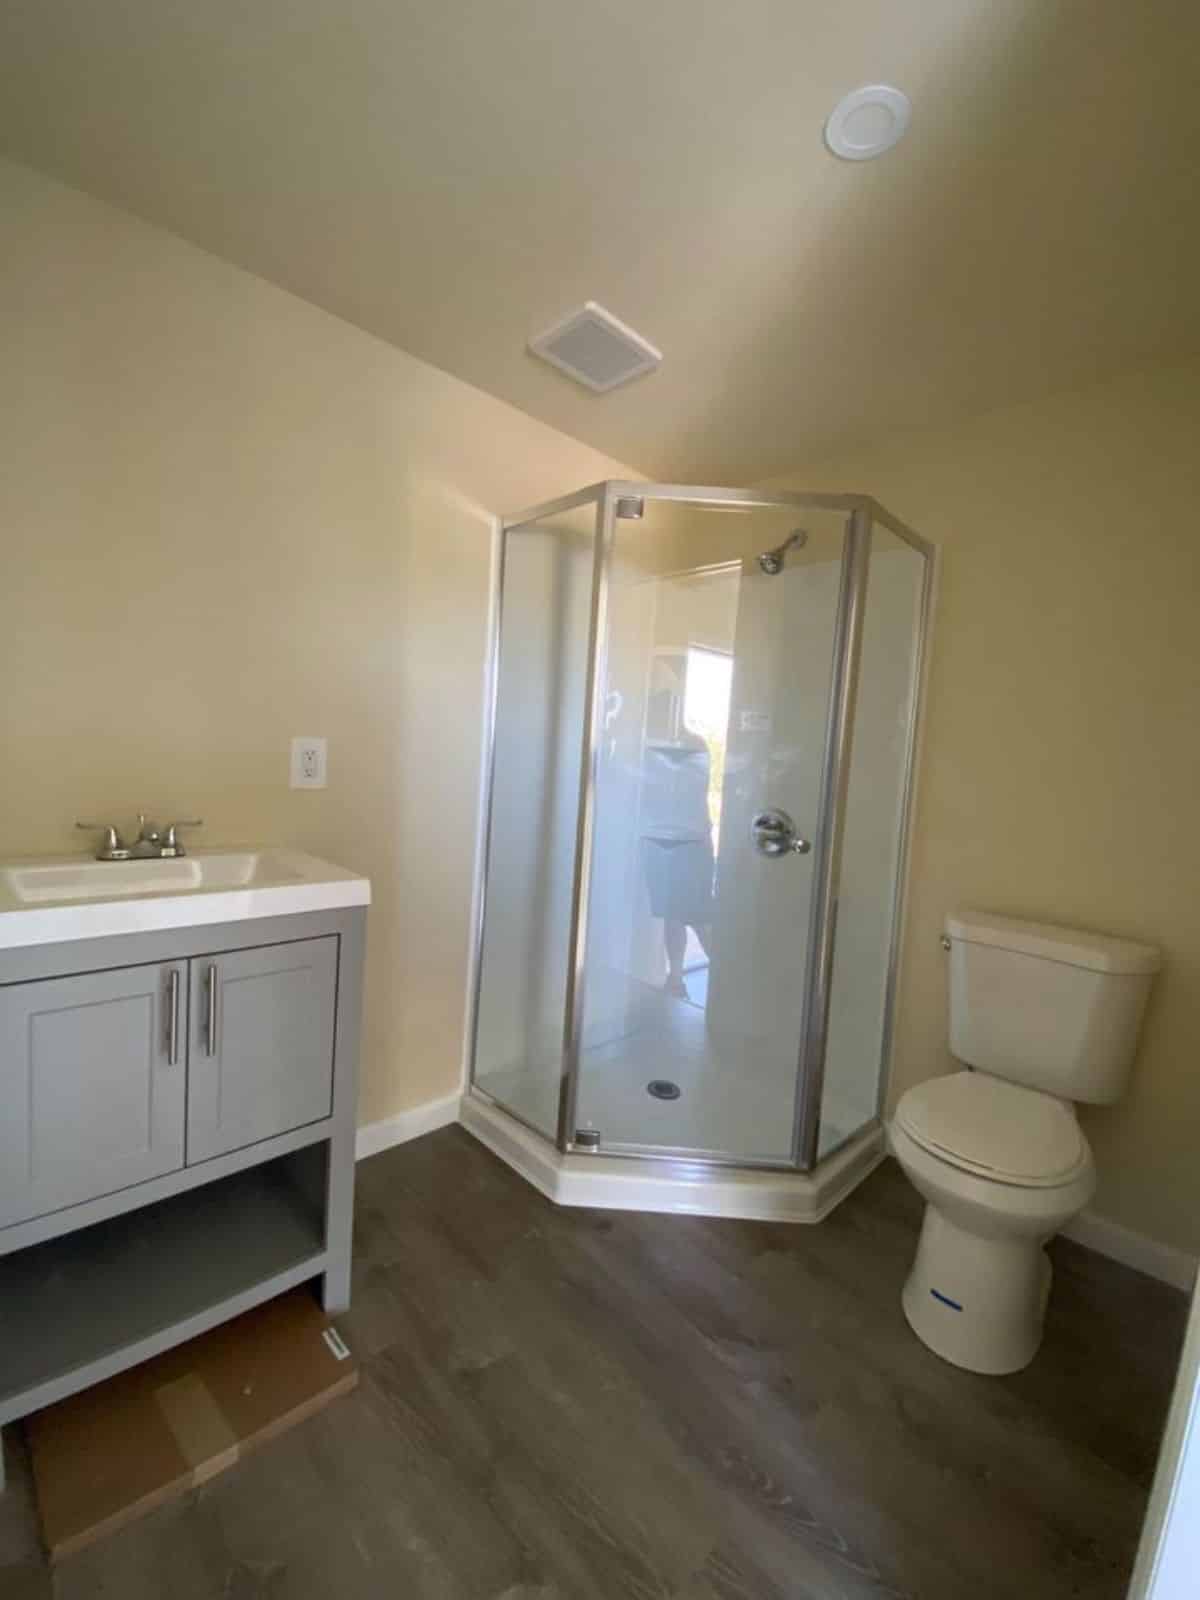 Bathroom is spacious with standard toilet, sink with vanity and separate shower area with glass door